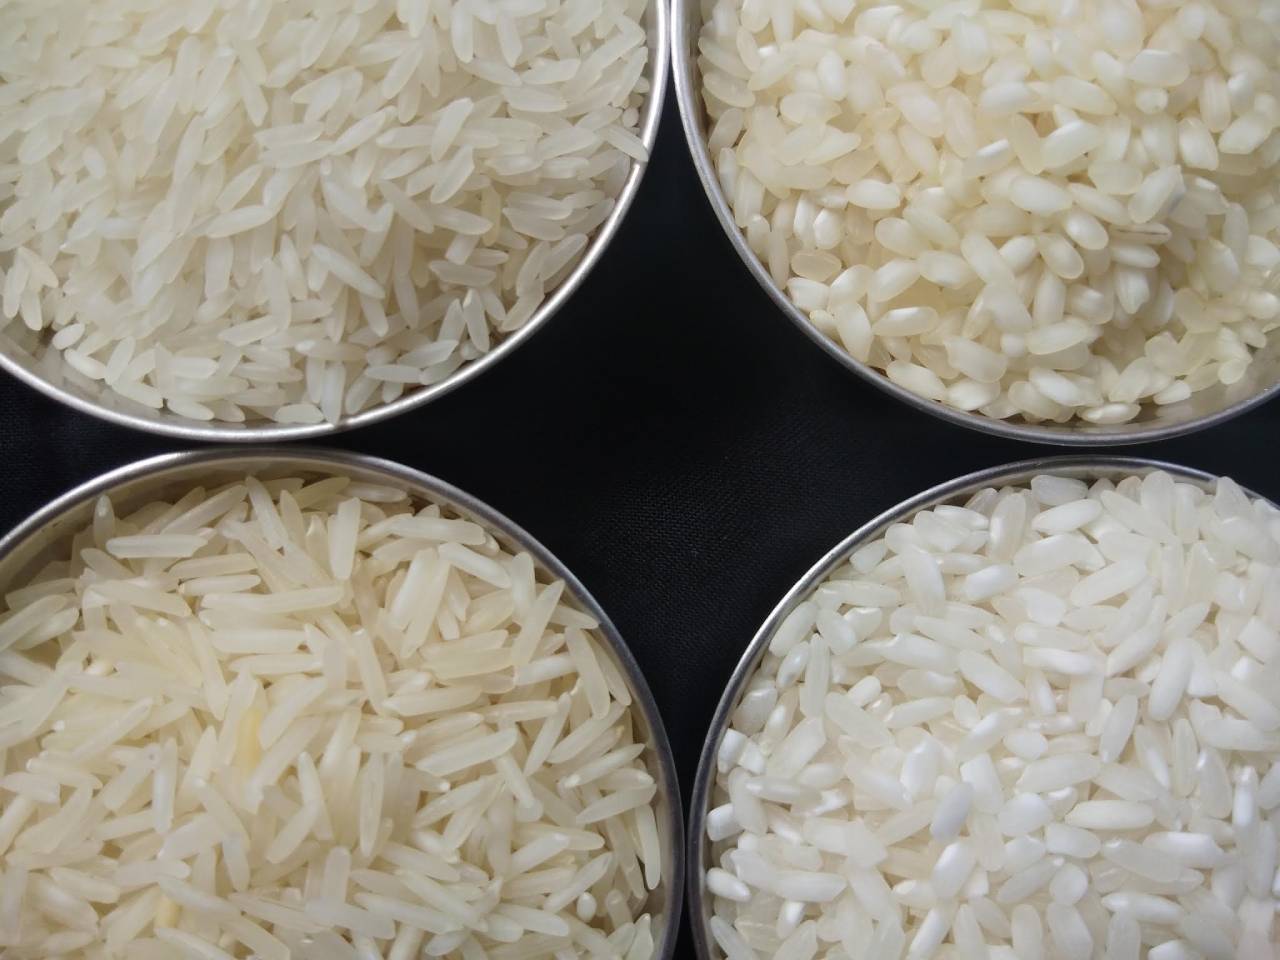 Parboiled rice and raw rice – Benefits and Uses.